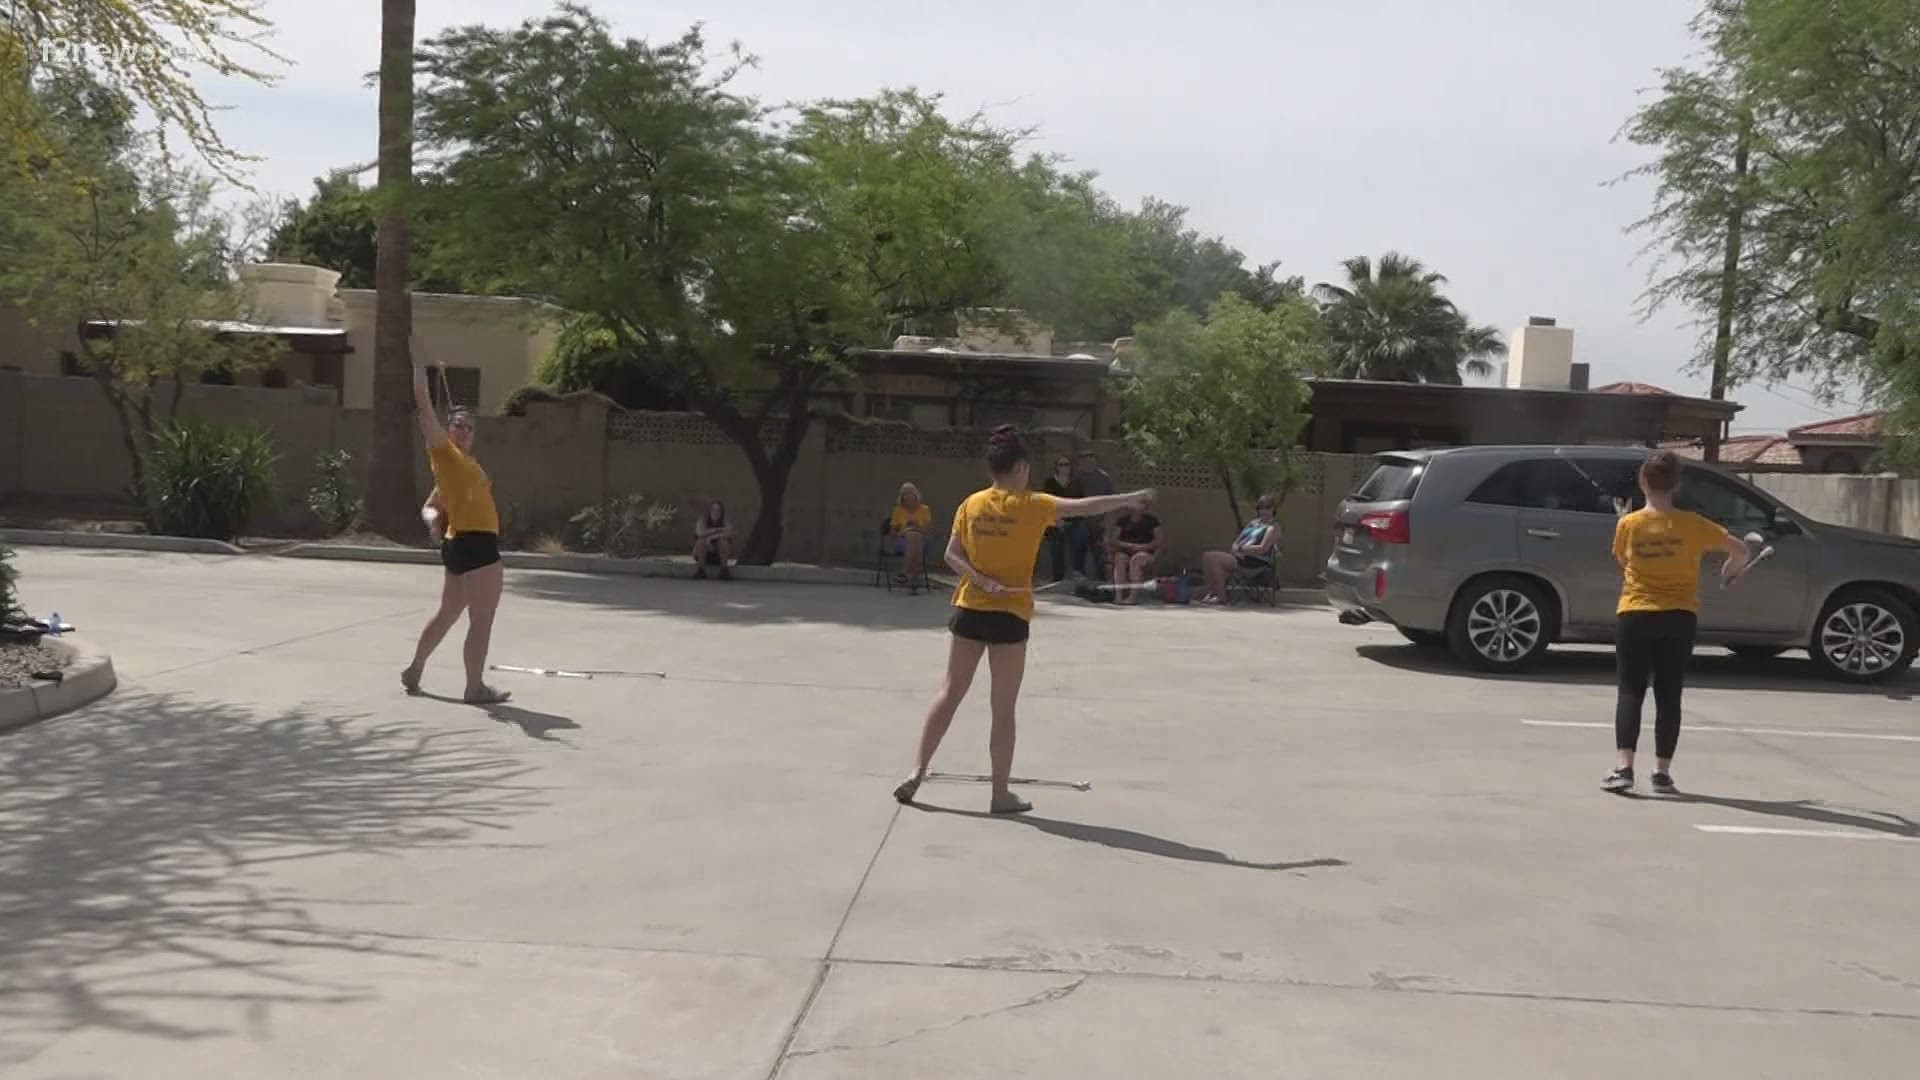 Under any condition, twirling practice on the pavement is far from favorable, but with rising temperatures, one team is desperate for an indoor space.